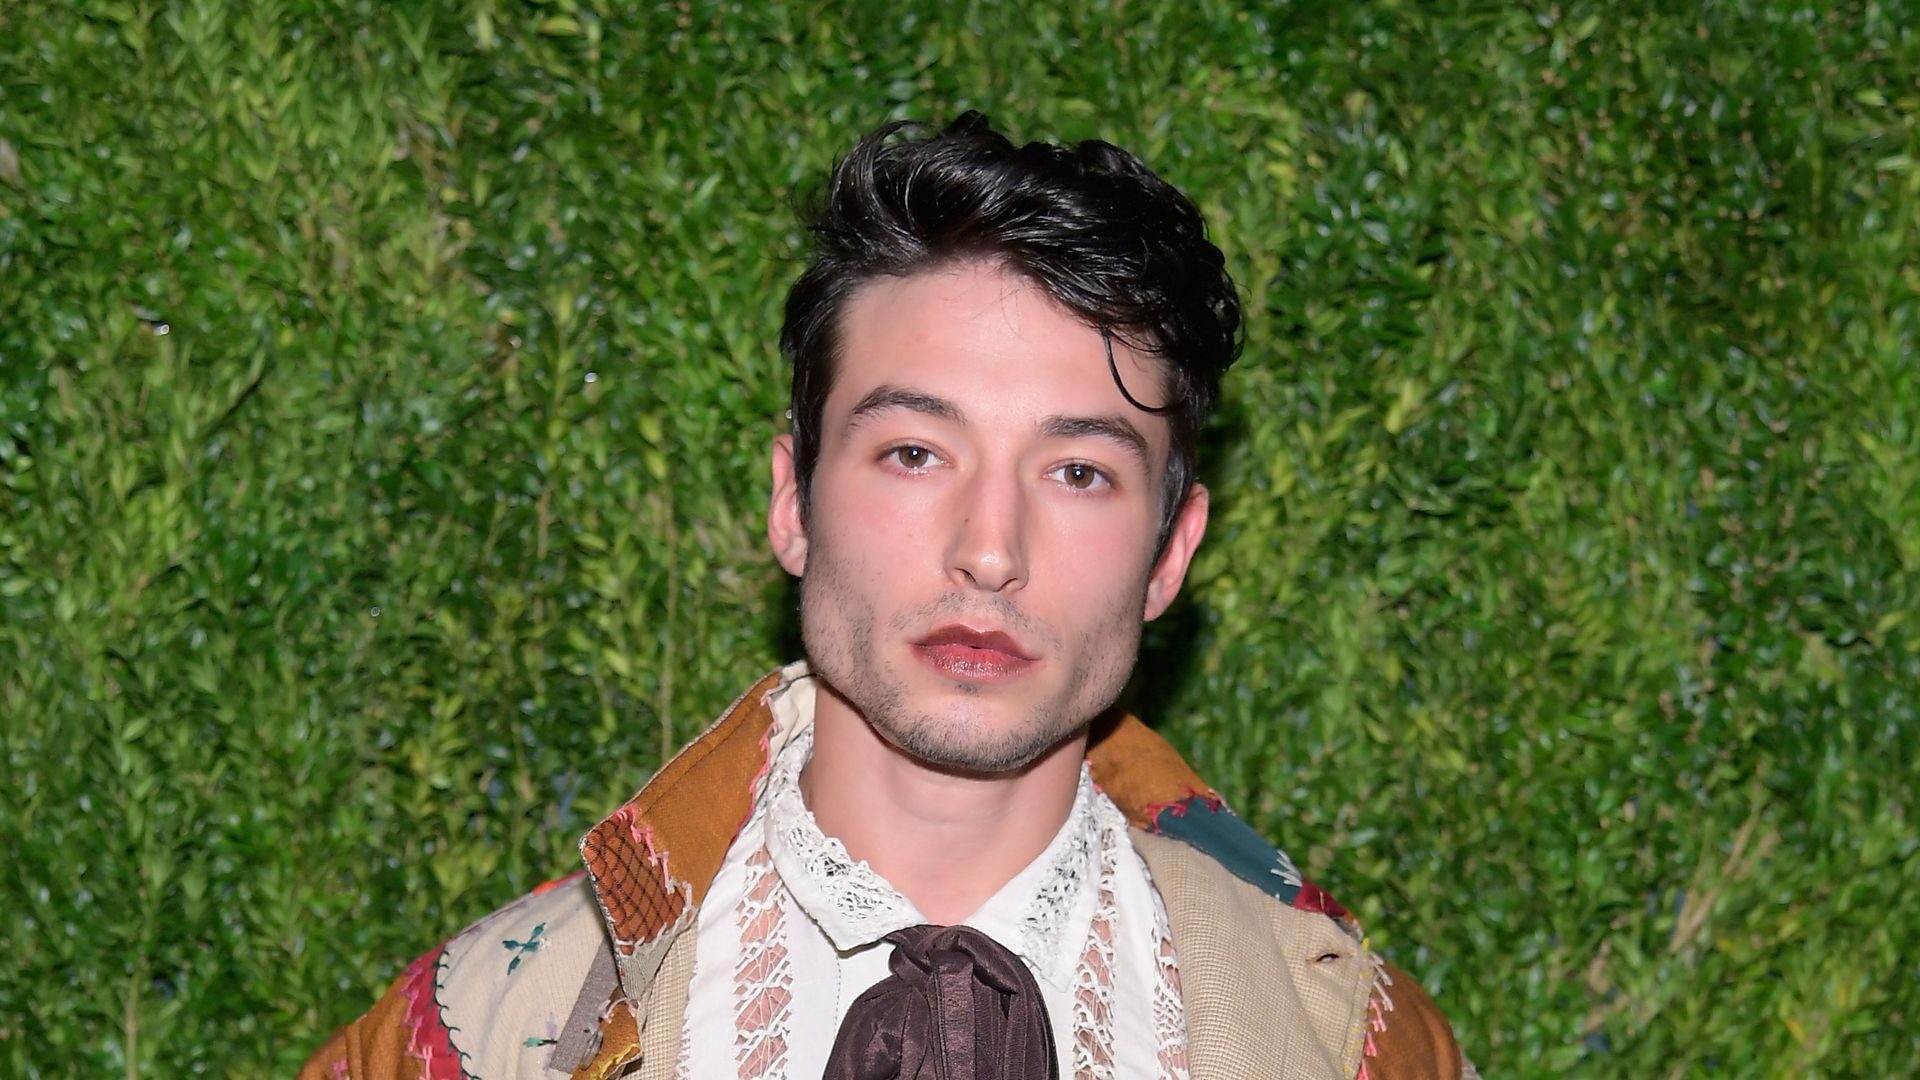 Ezra Miller attends the CFDA / Vogue Fashion Fund 15th Anniversary Event at Brooklyn Navy Yard on November 5, 2018 in Brooklyn, New York